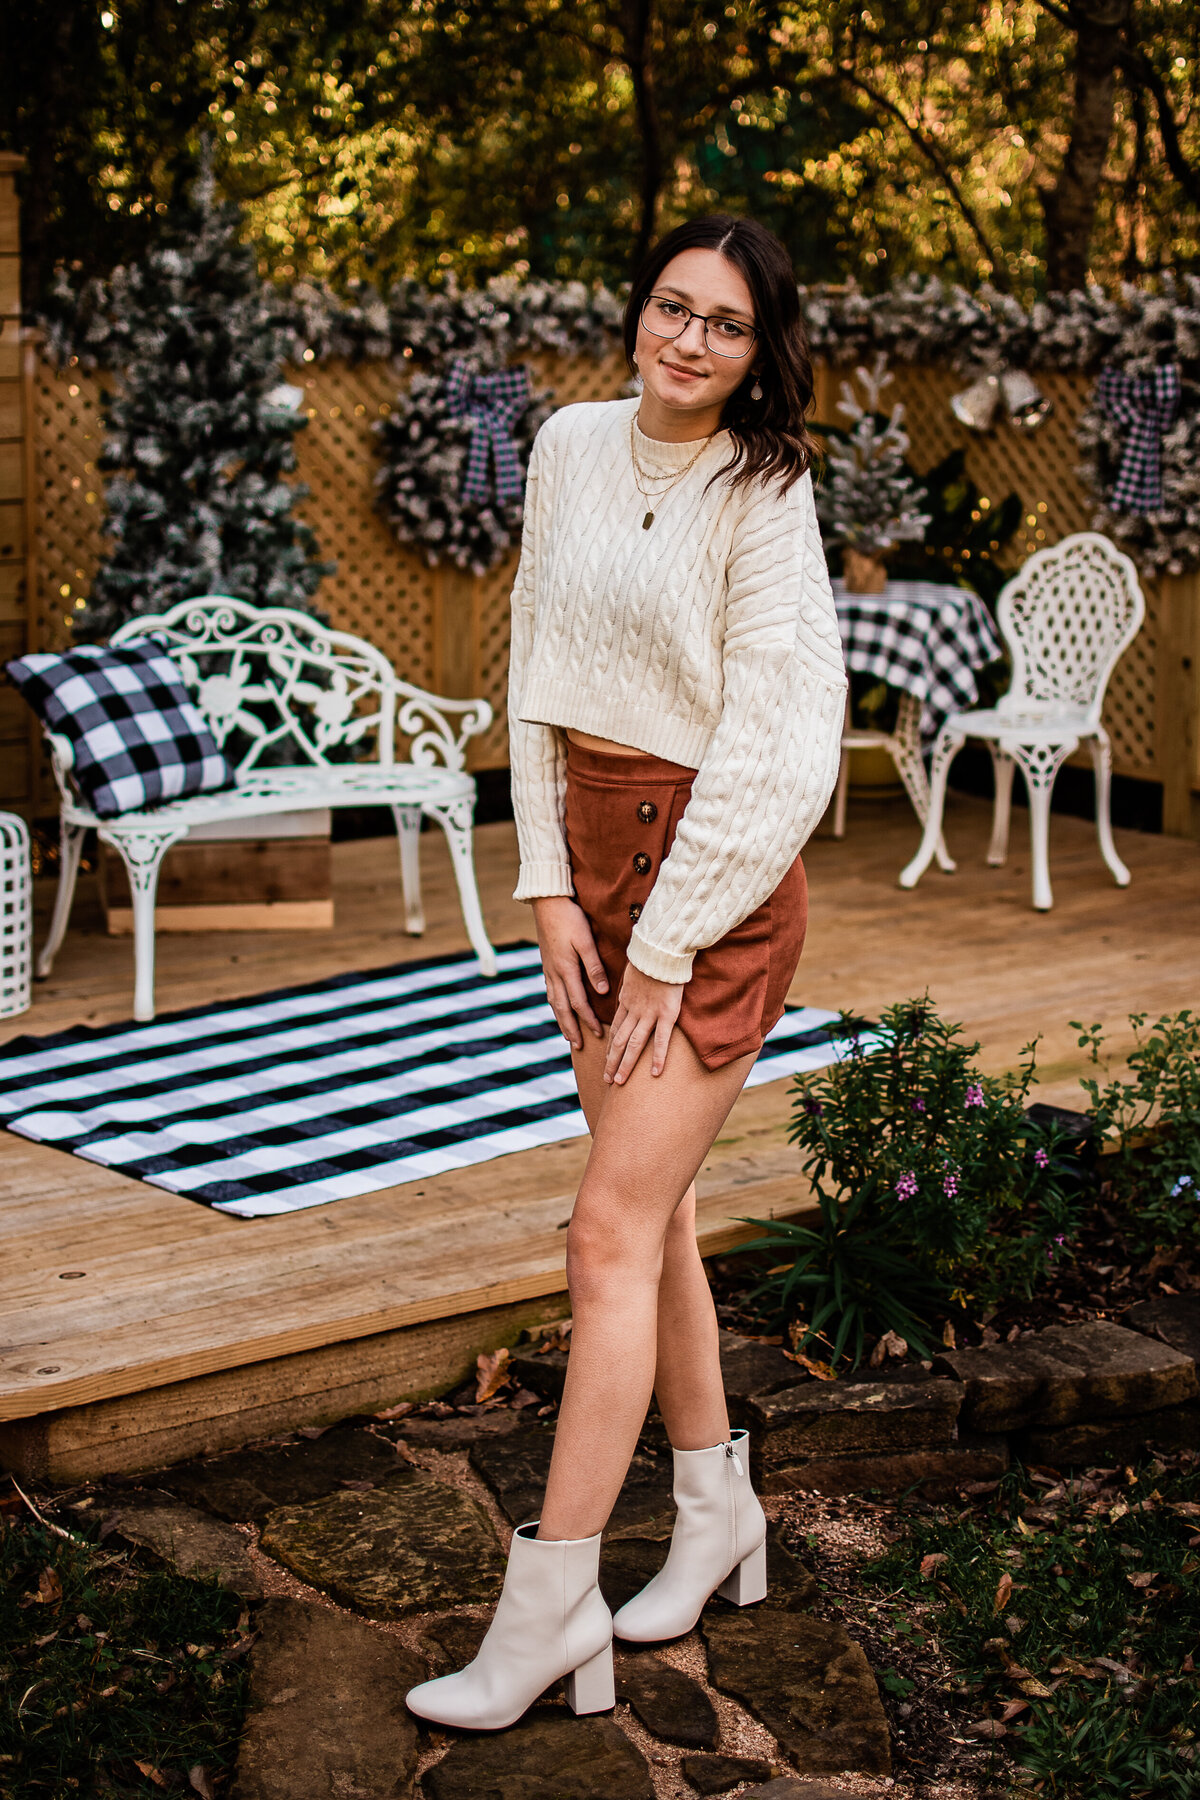 A senior wearing an orange skirt, white sweater, and white boots stands in front of a patio decorated with white and black plaid Christmas items.